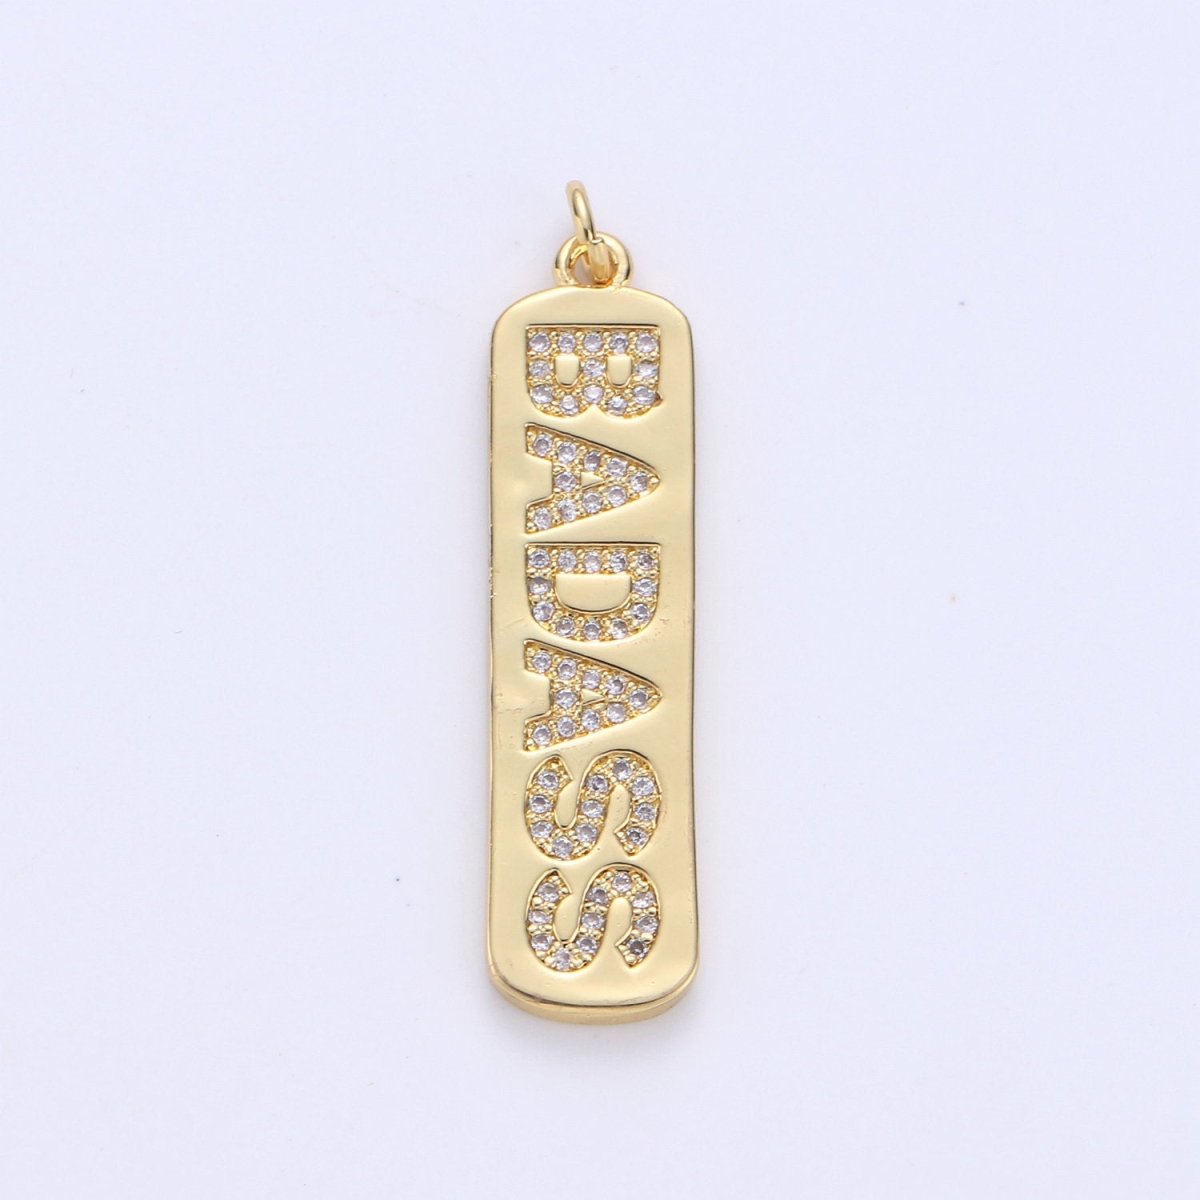 Micro Pave Badass Word Charm Rectangle in 14k Gold Filled Drop Pendant Long Badass Girl Charm for Necklace Earring Component D-156 - DLUXCA